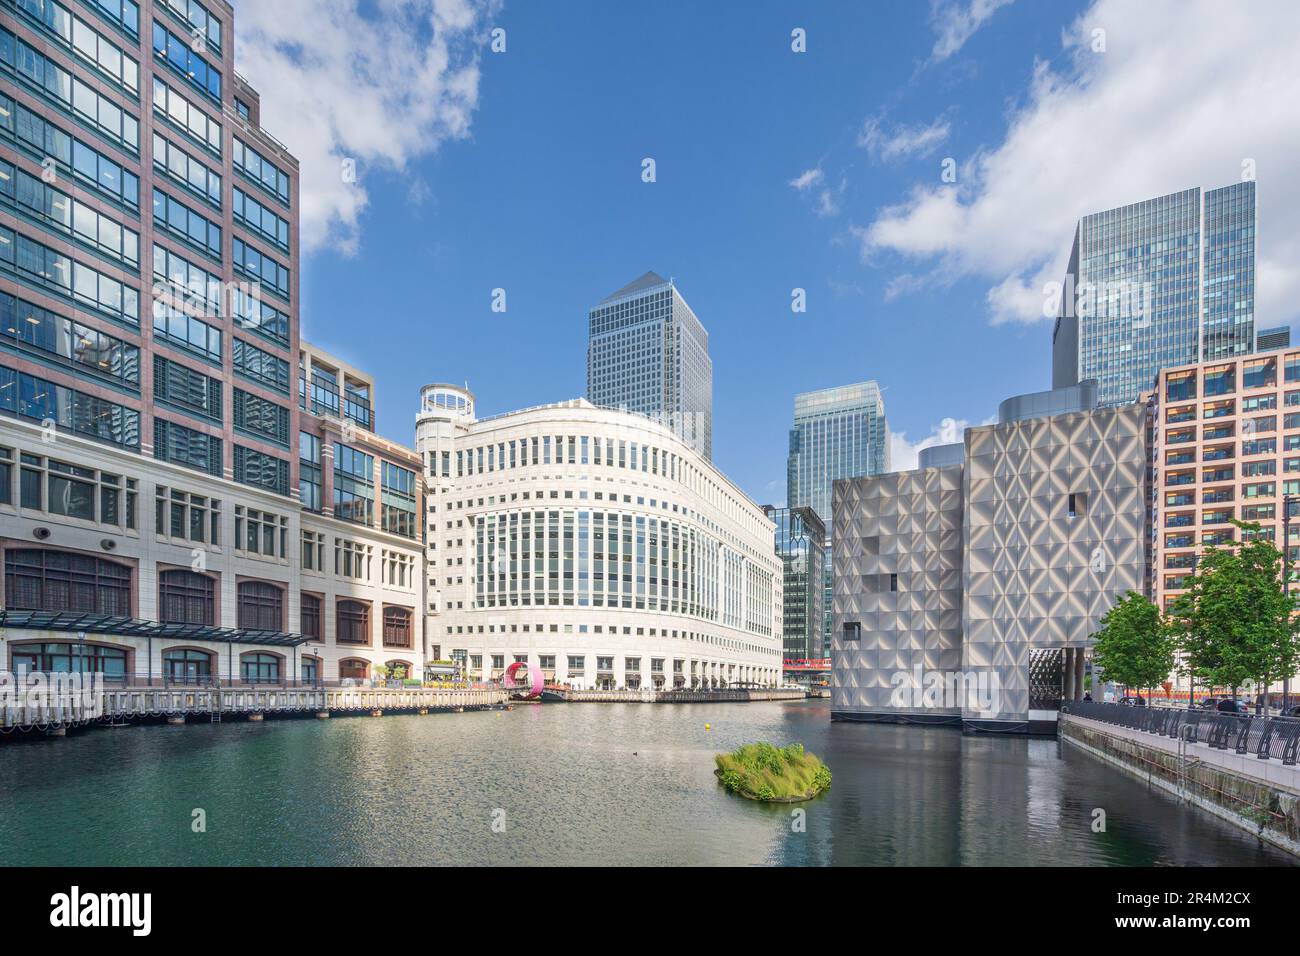 Middle Dock in Canary Wharf Stock Photo